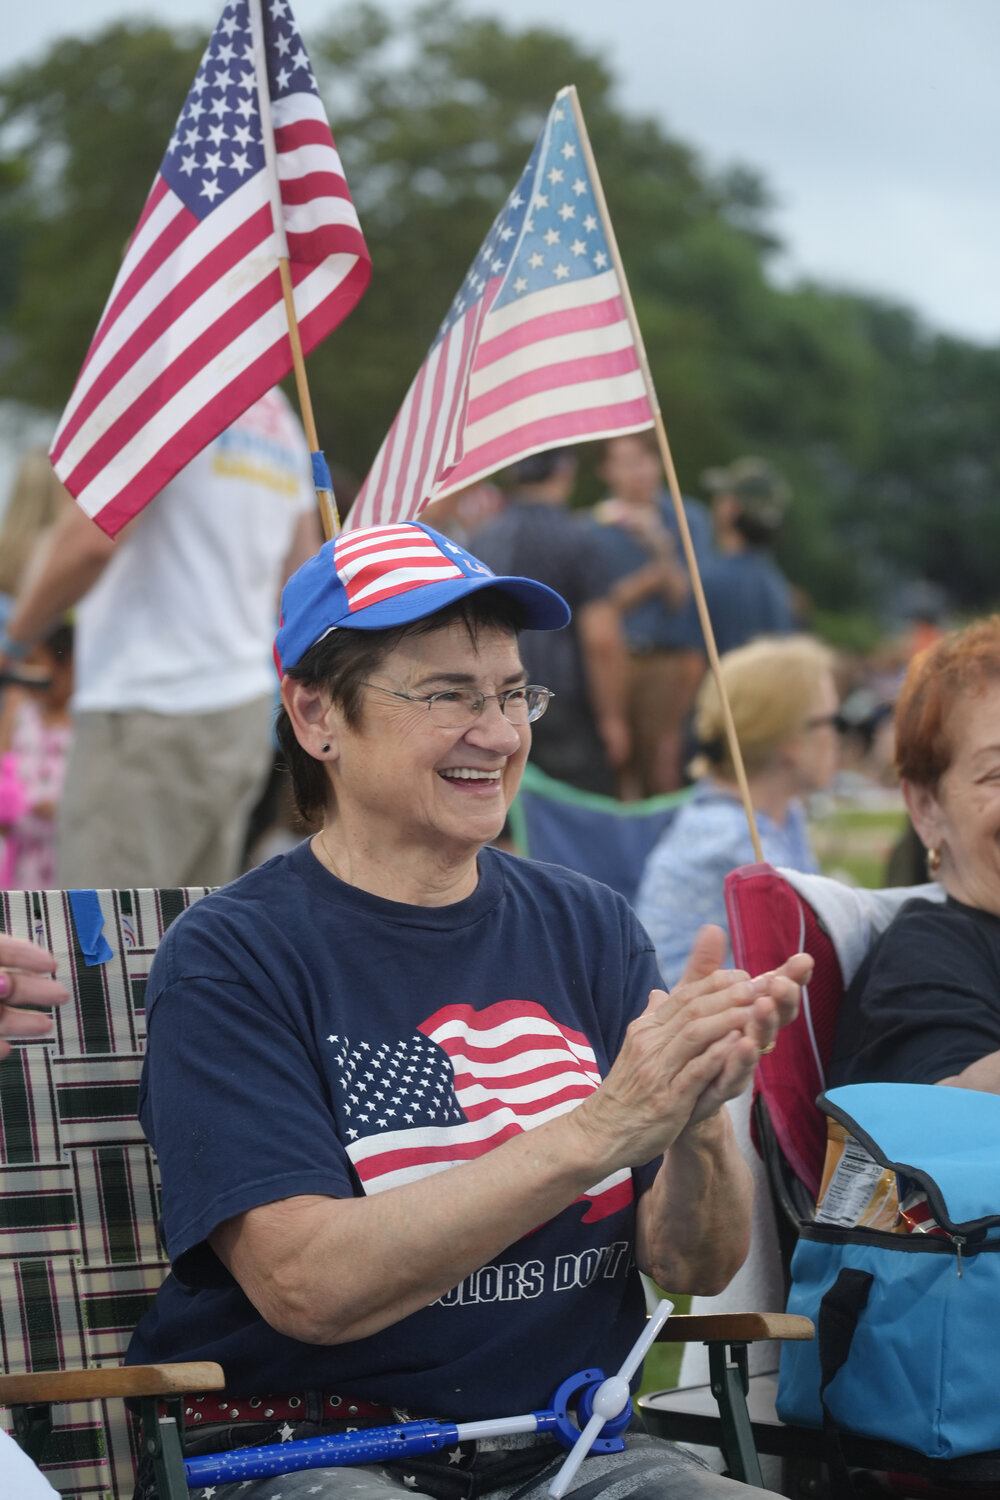 Eveline Marcello of West Hempstead dressed up in red, white and blue to show her patriotism at the annual fireworks celebration and concert in Rockville Centre on July 8.